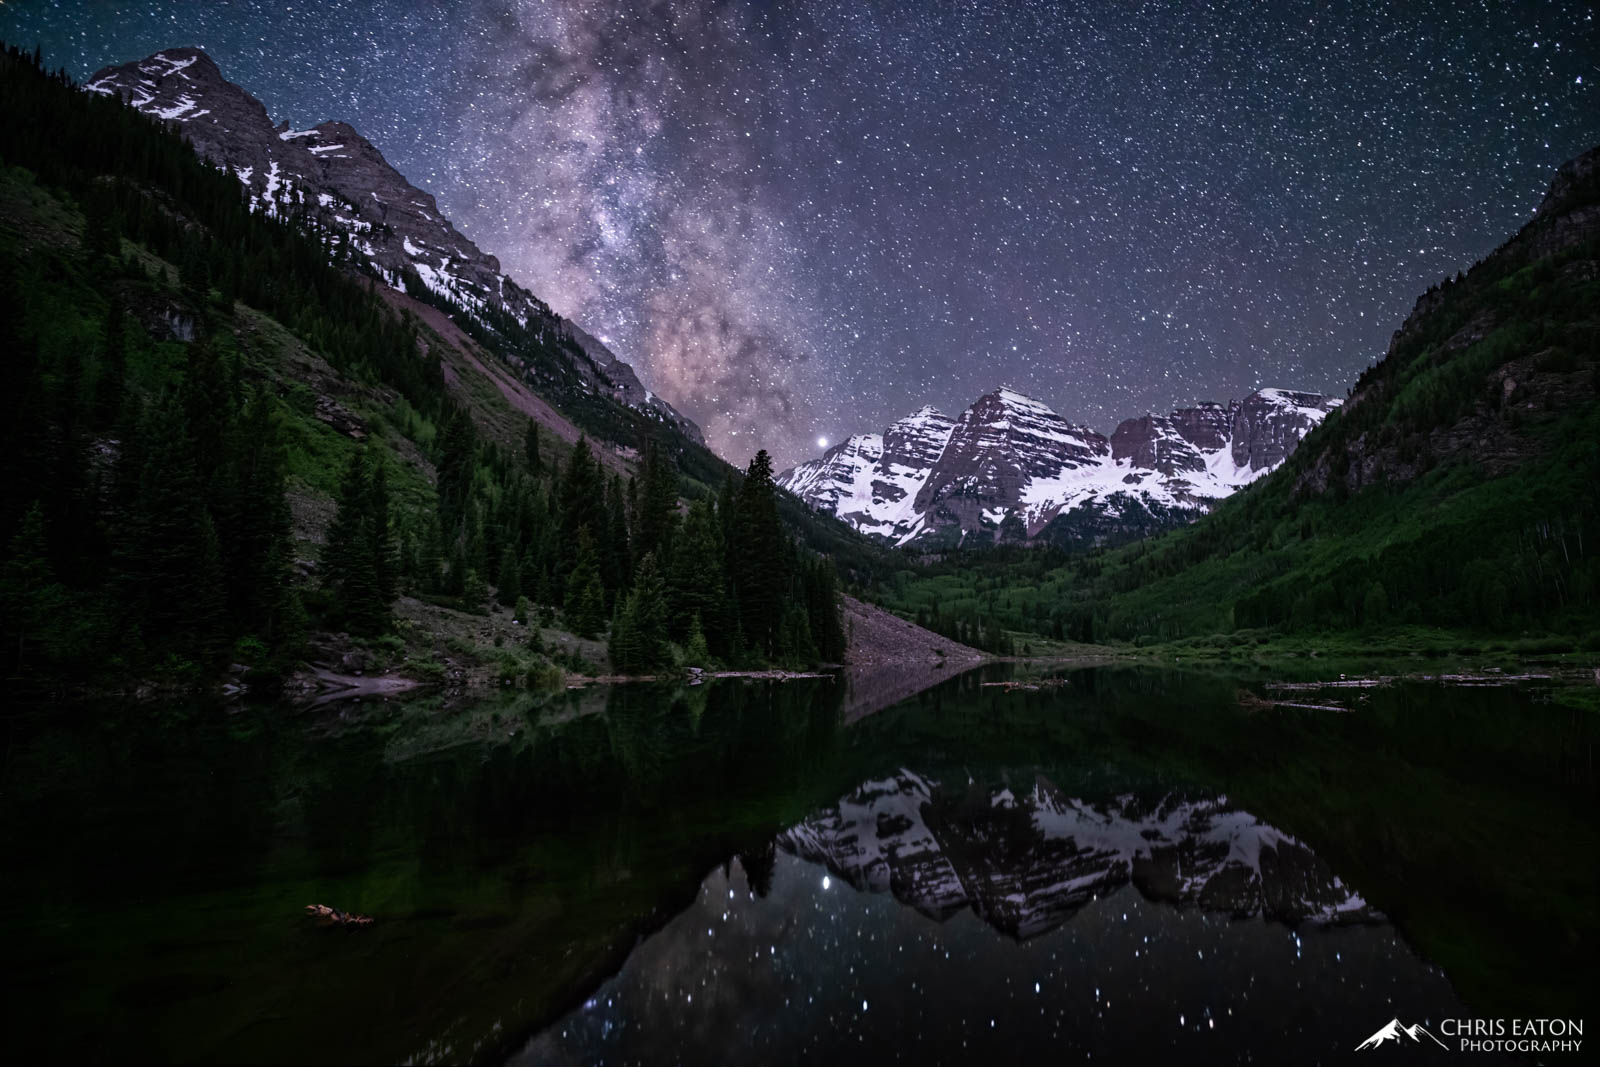 The Milky Way, our galaxy, rises over the Maroon Bells and Maroon Lake, where its reflection imprints the calm waters.